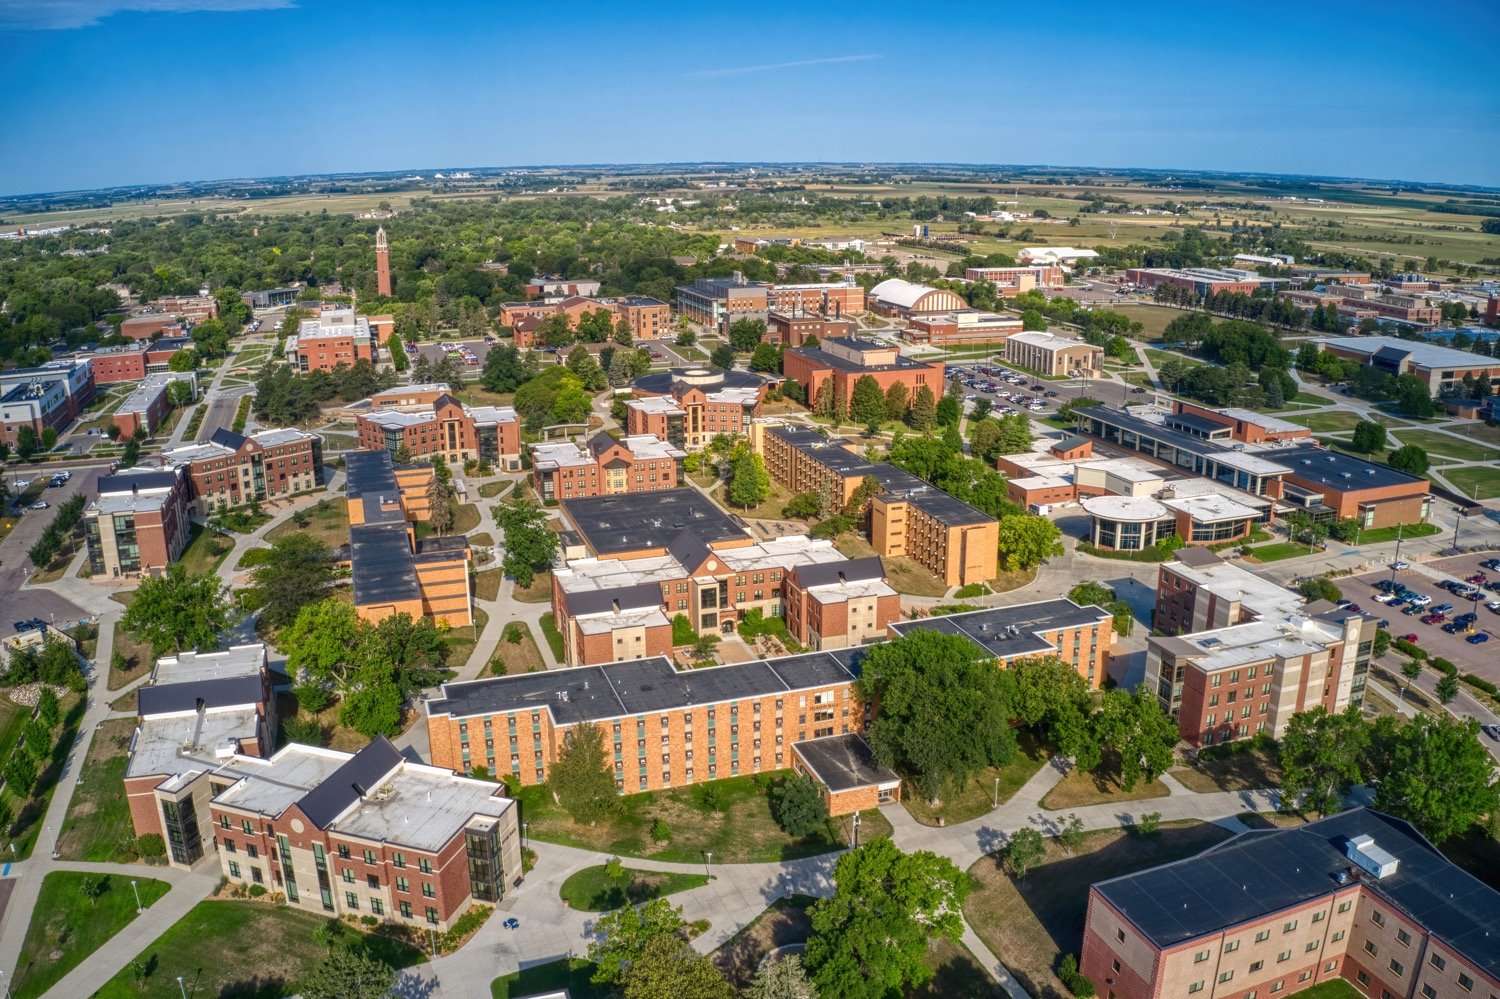 Aerial view of a large college campus that could benefit from an improved energy management system.